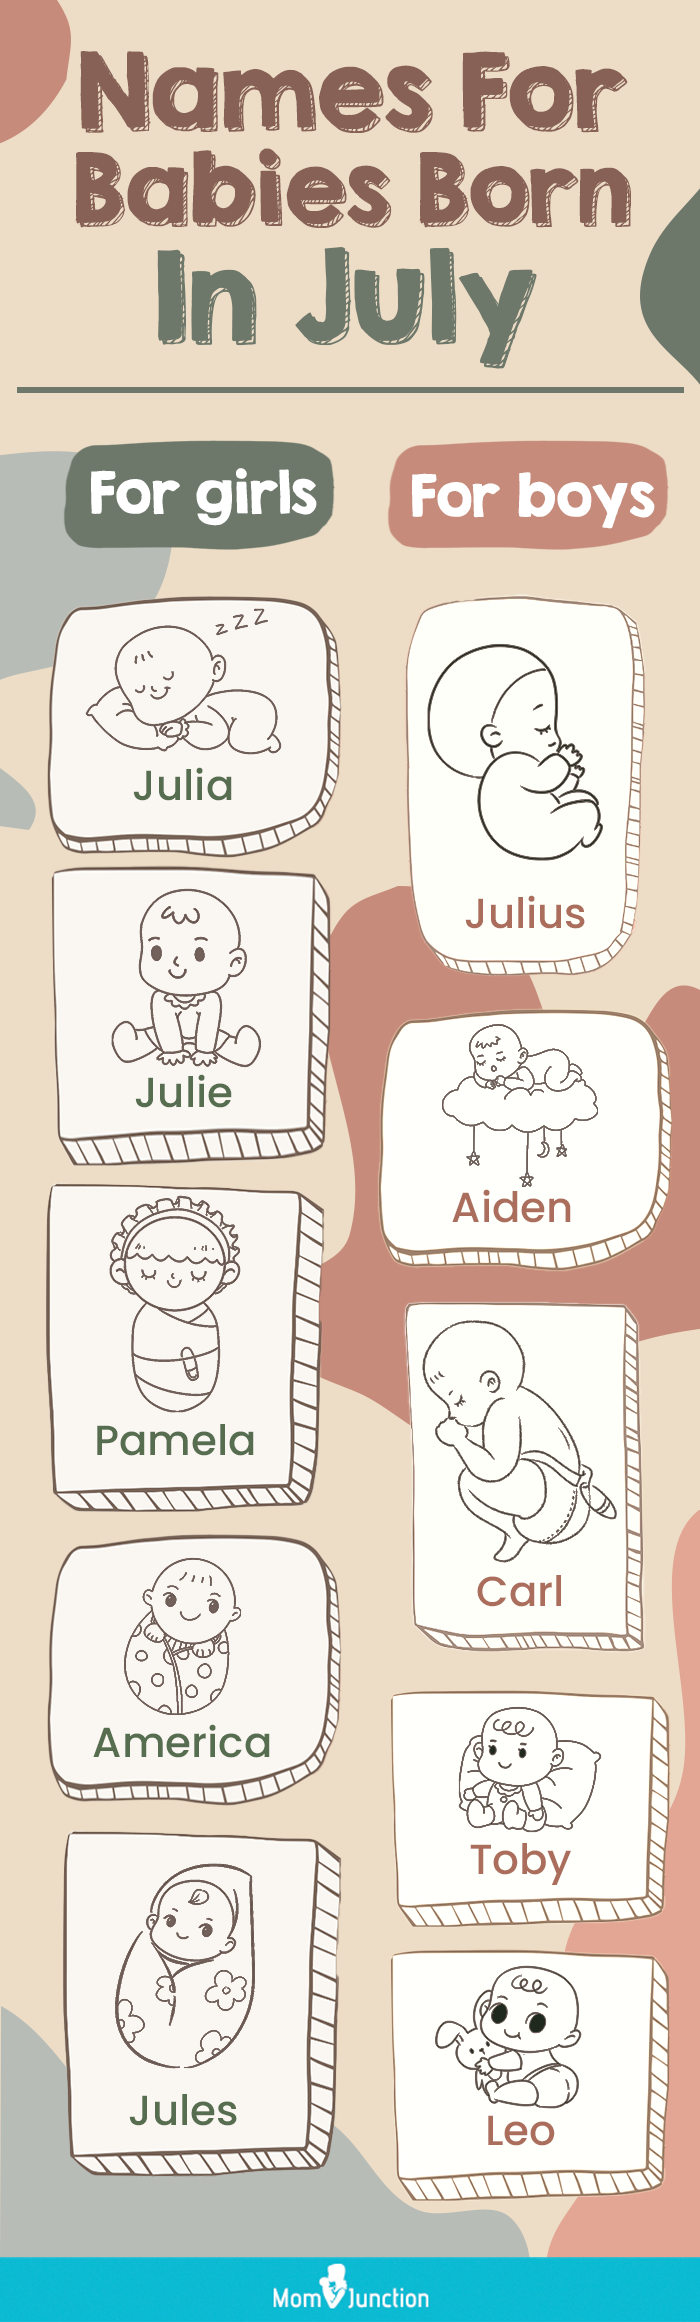 names for babies born in july (infographic)